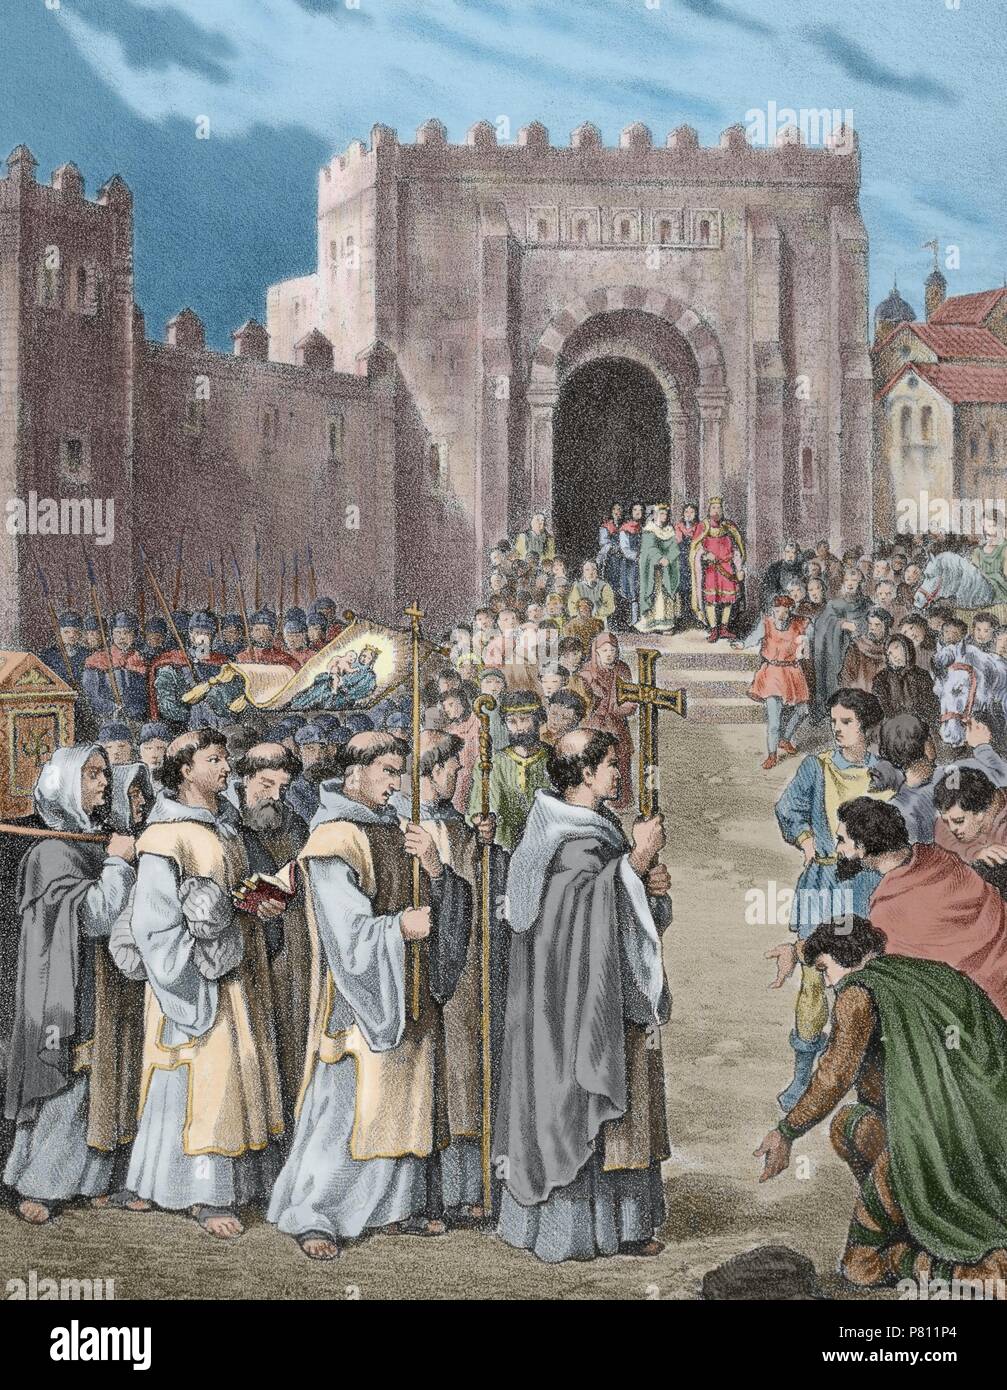 Spain. The king Ferdinand I of Leon, called the Great, (1015-1065), receives the mortal remains of St. Isidore of Seville (c. 556-636), bishop, confessor and Doctor of the Church. Colored engraving. 19th century. Stock Photo